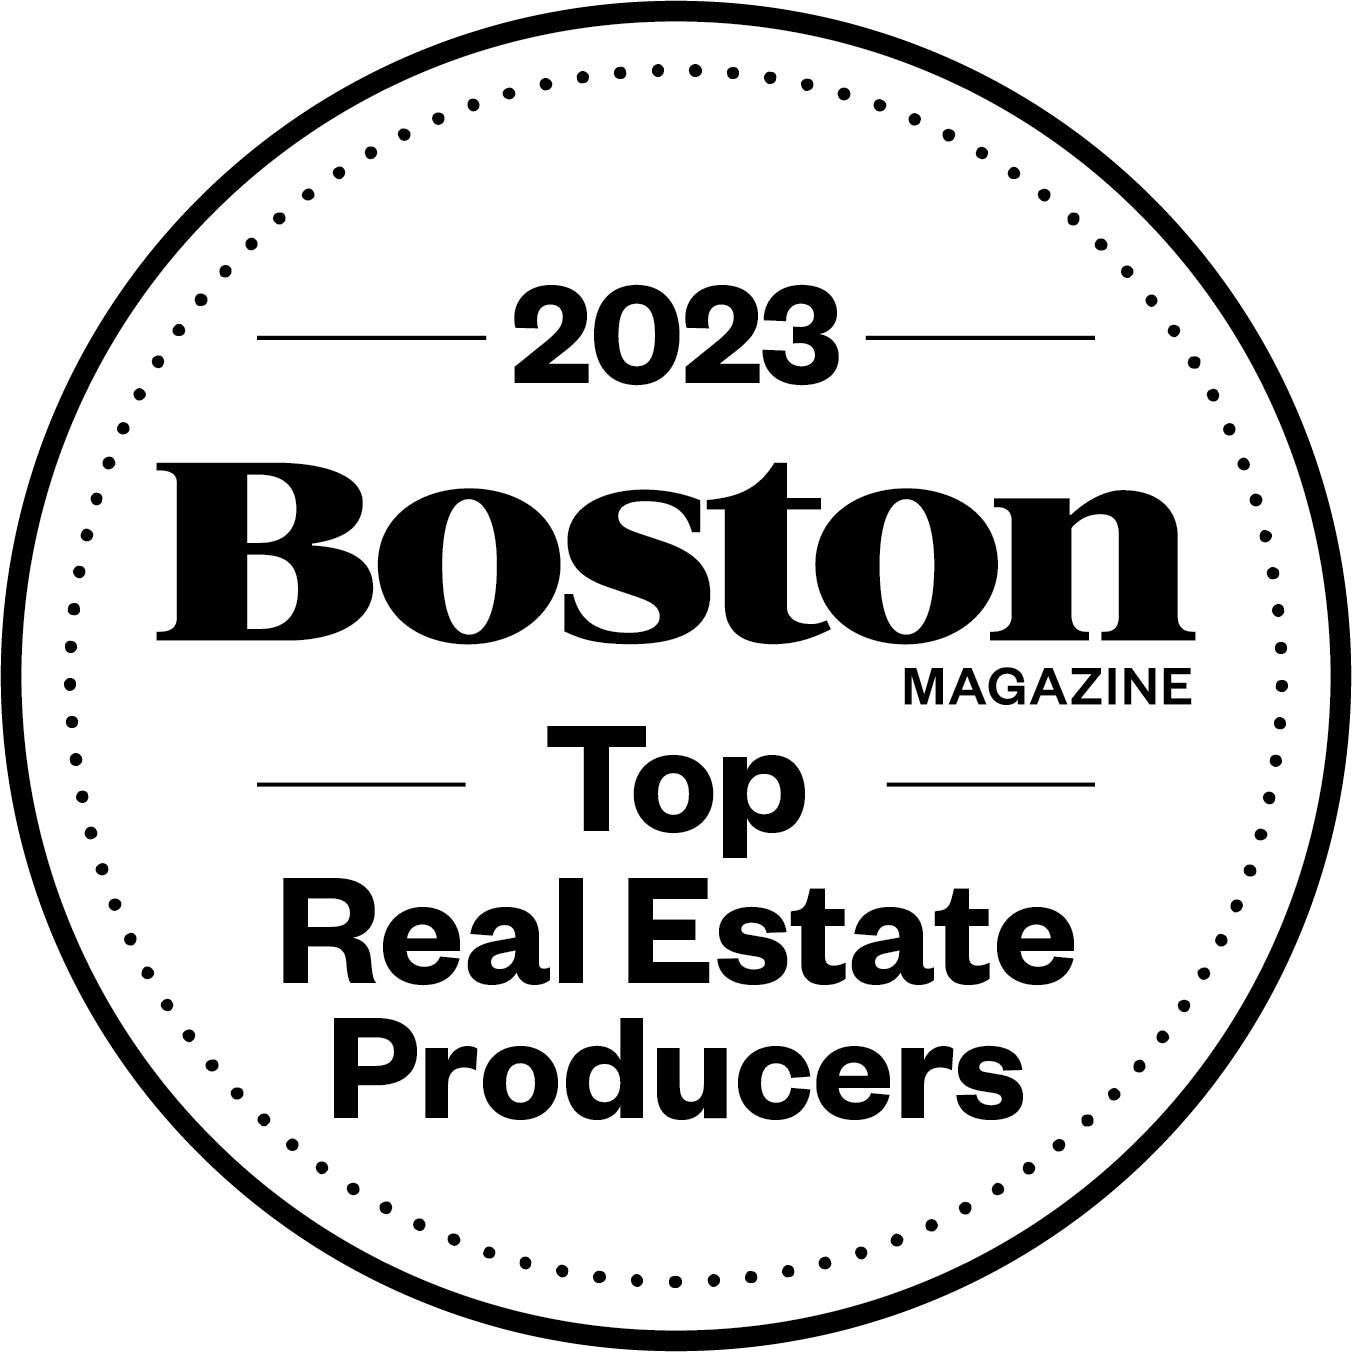 Boston Magazine Top Real Estate Producers Window Decals